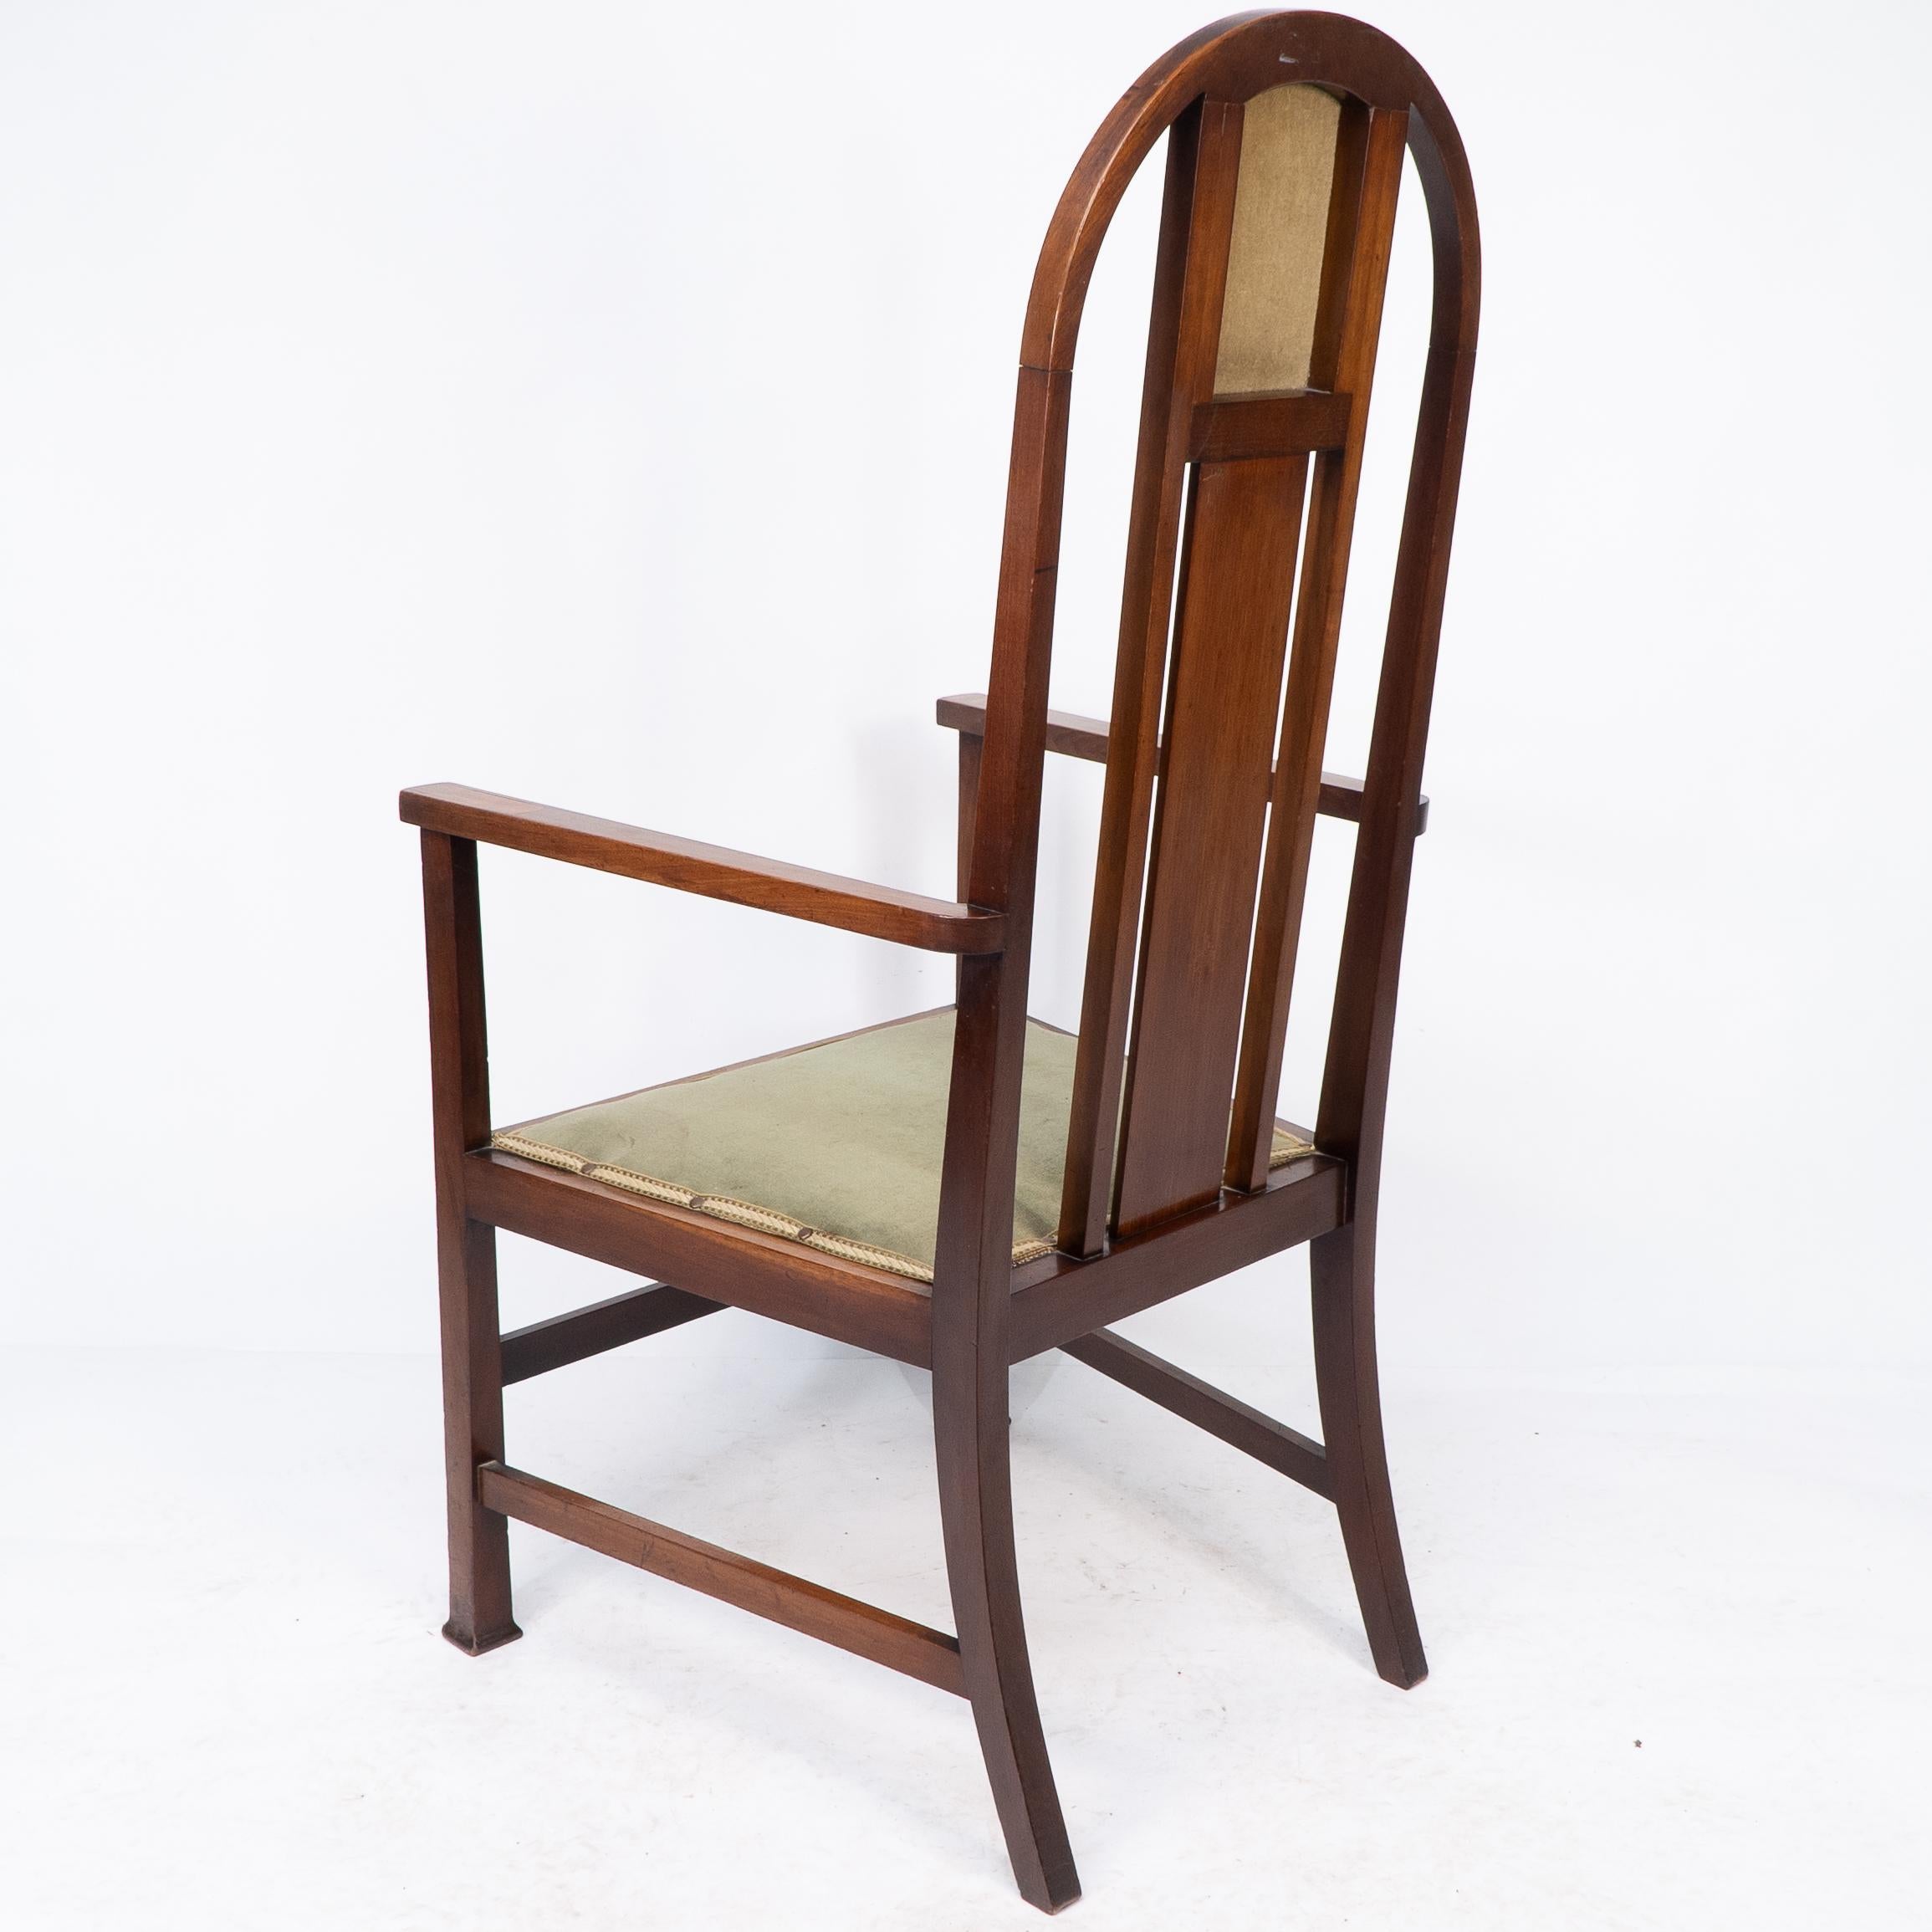 Liberty and Co attri, A Pair of Arts and Crafts mahogany and Inlaid Armchair For Sale 10